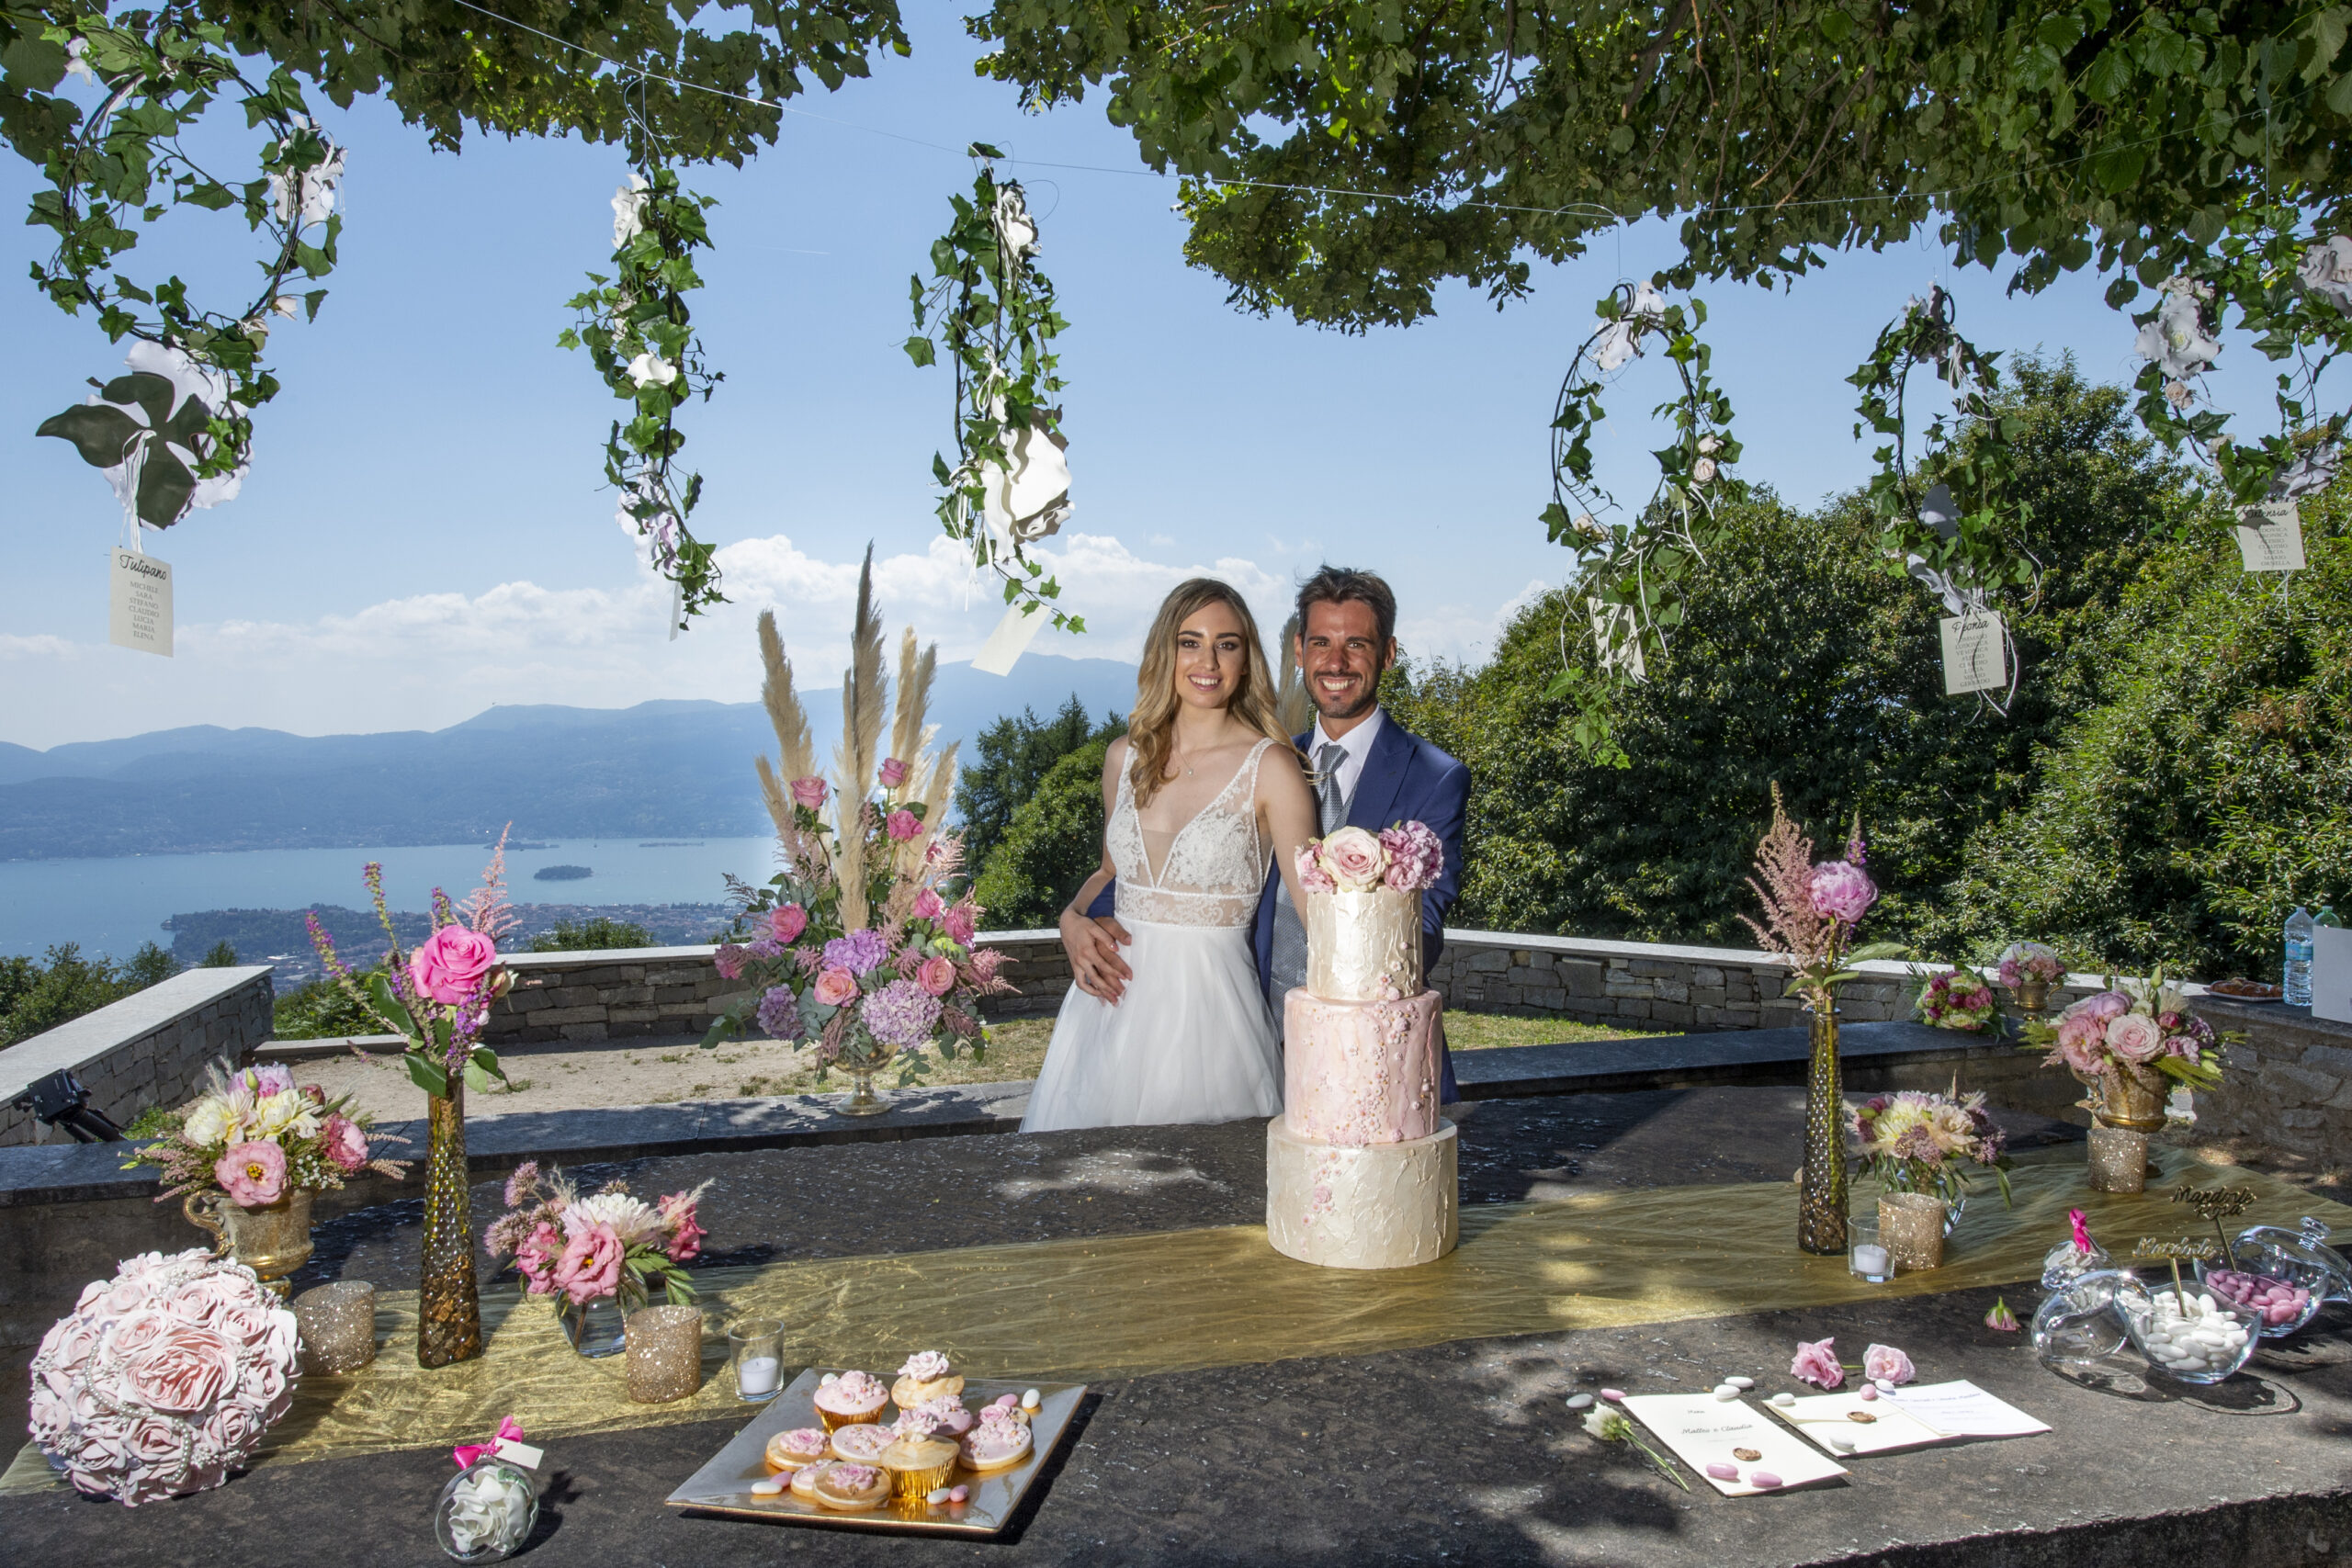 ‘Pops of Pink’ Styled Shoot Overlooking Italy’s Lake Maggiore